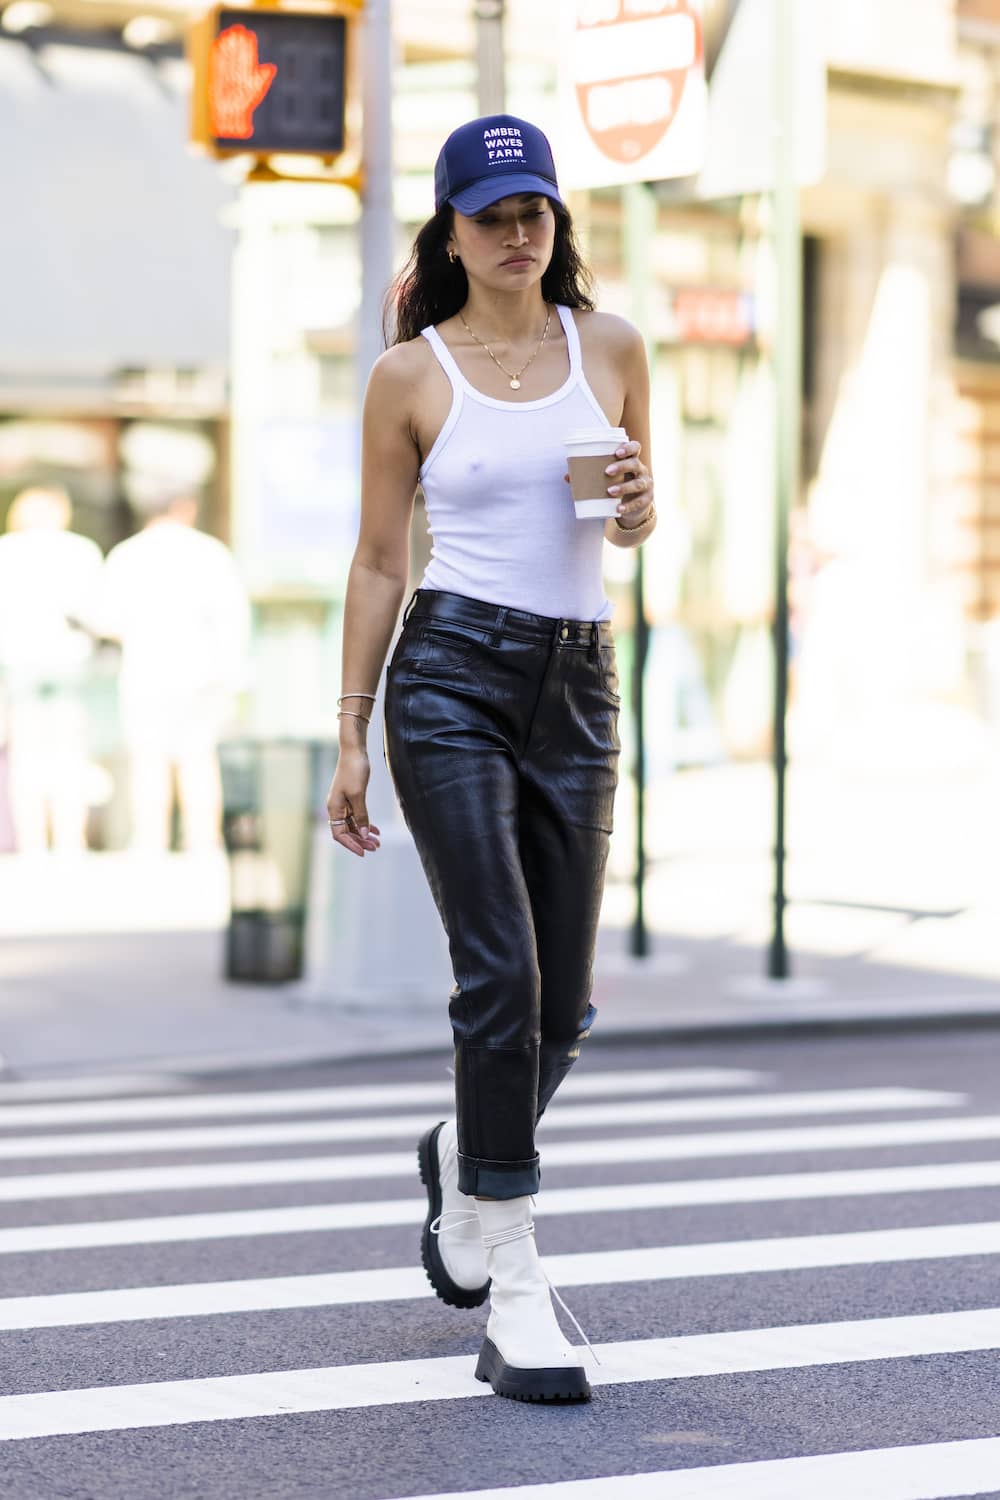 The 30 year old Australian model, Shanina Shaik showed off her phenomenal body in a see through white tank top when she stepped out in the street of New York City on September 29, 2021.